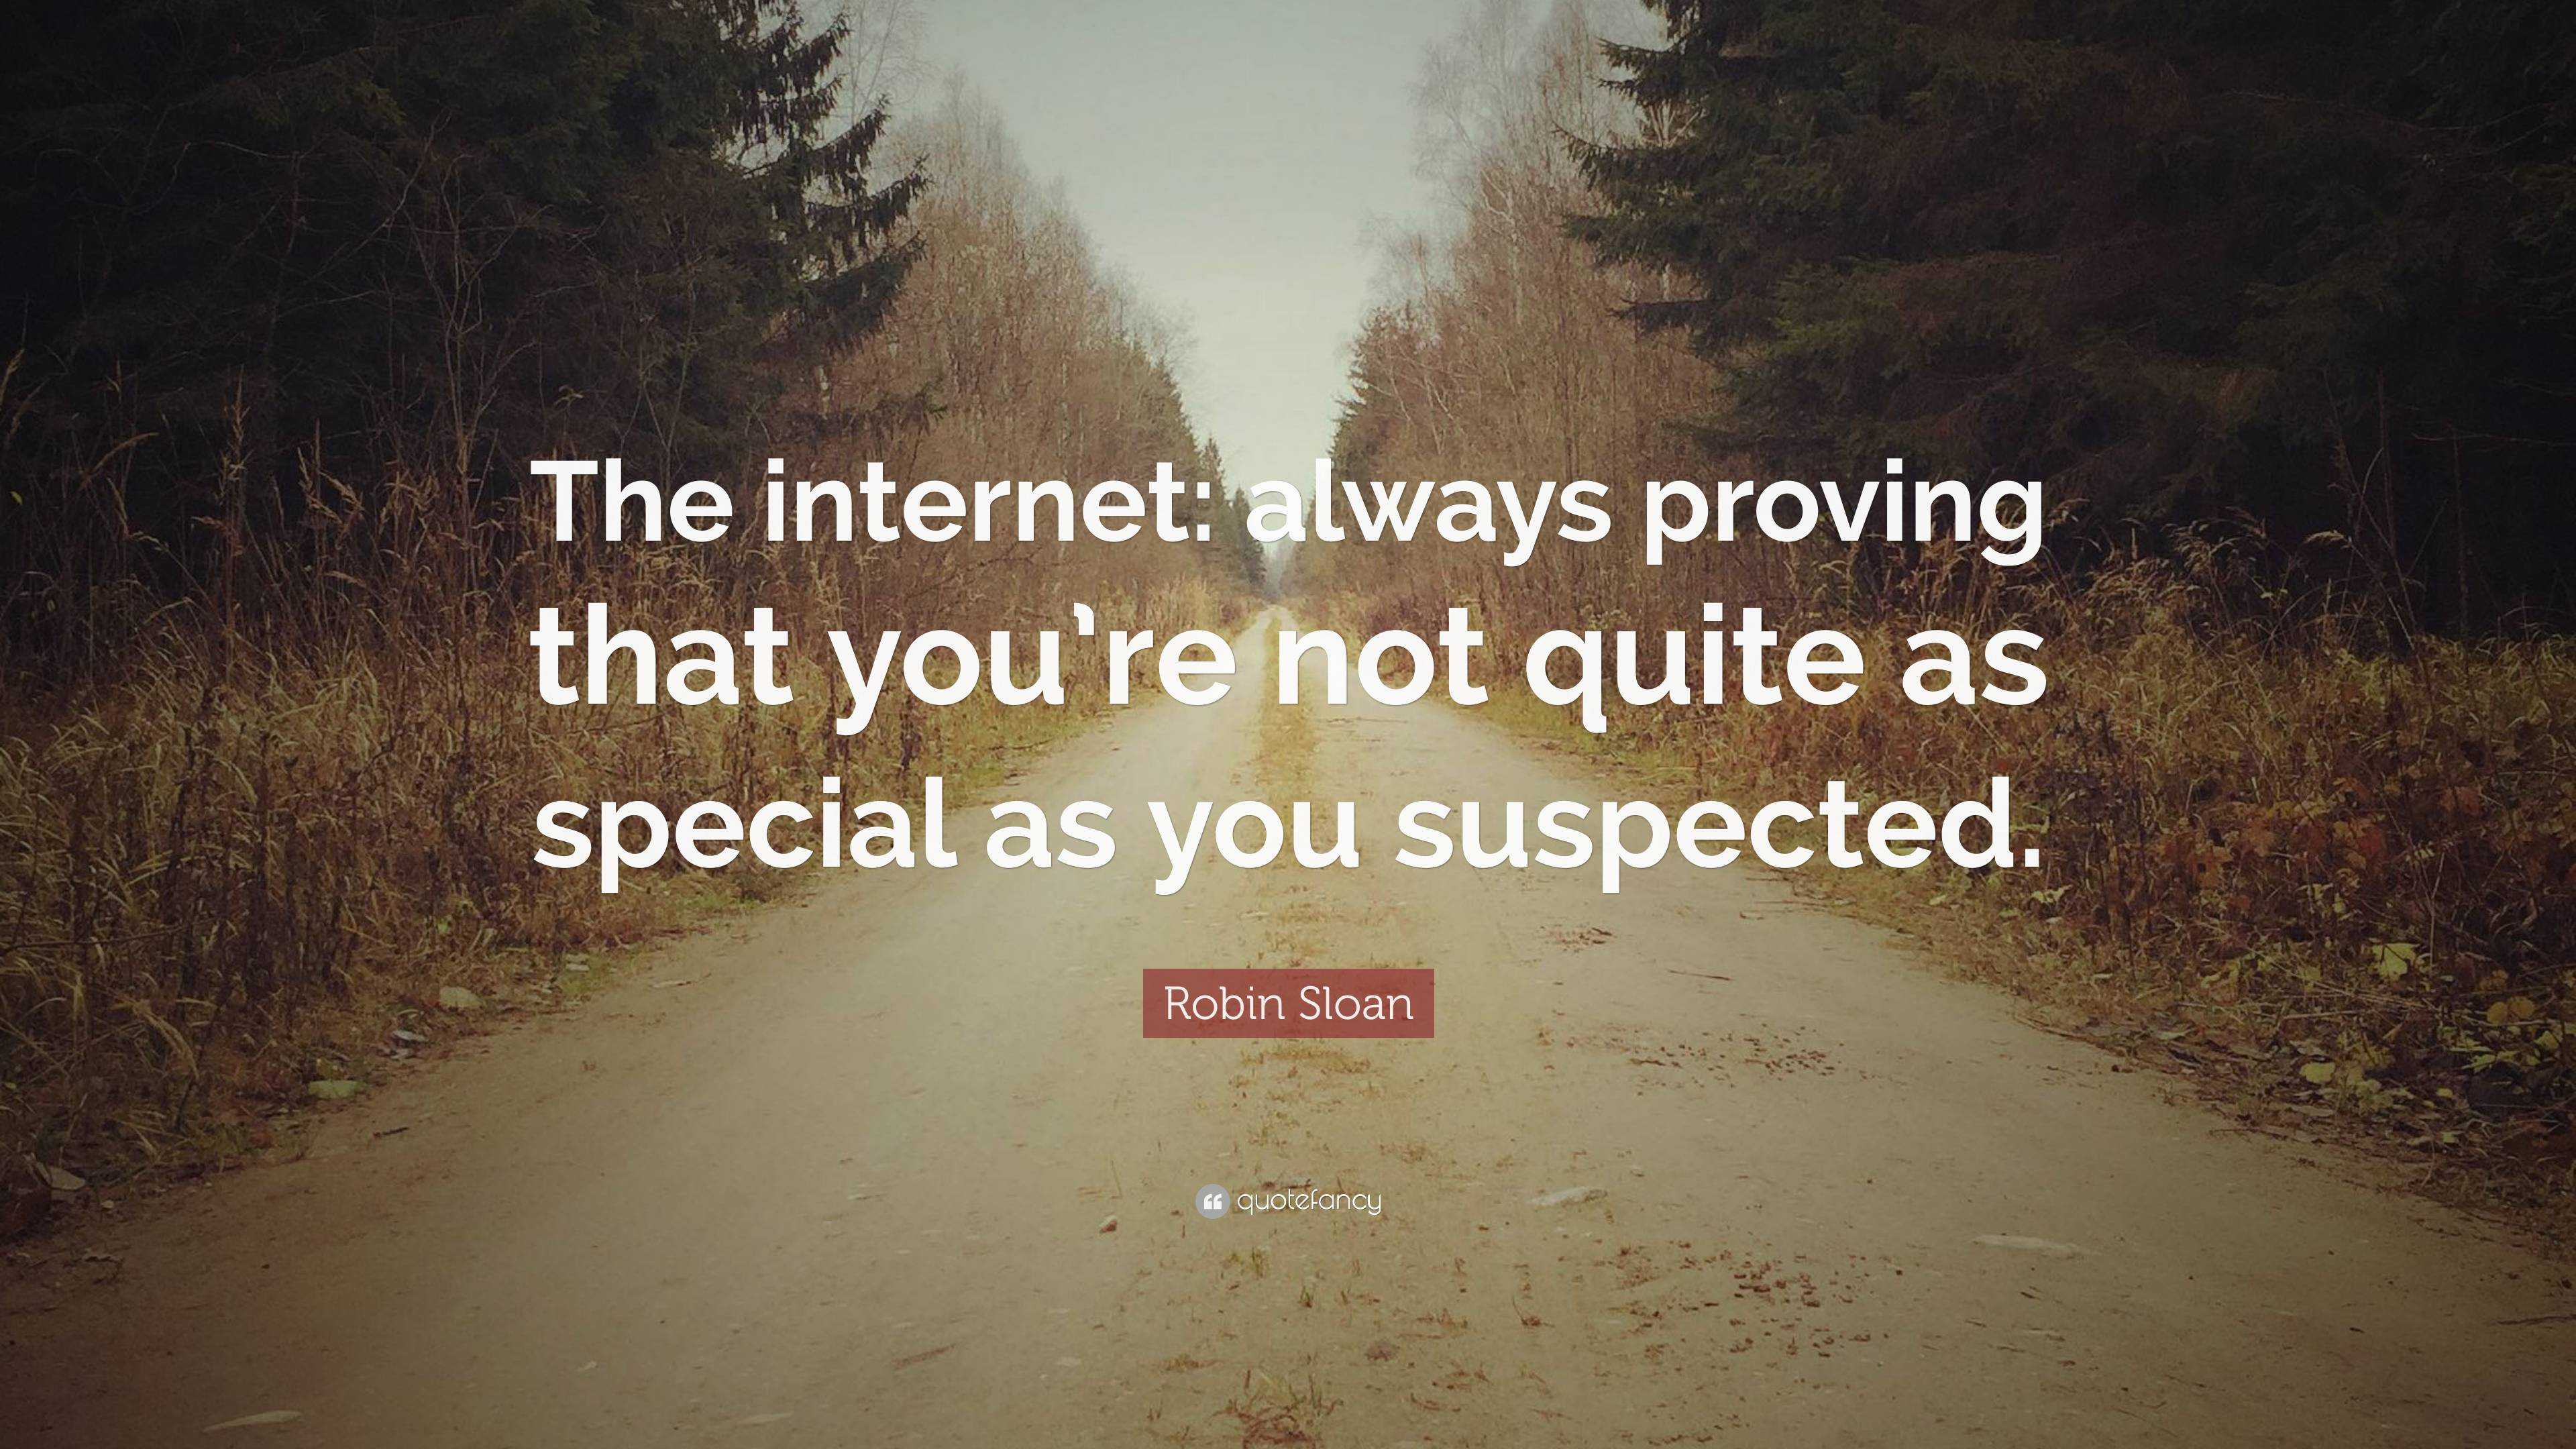 Robin Sloan Quote: “The internet: always that you're not quite as as you